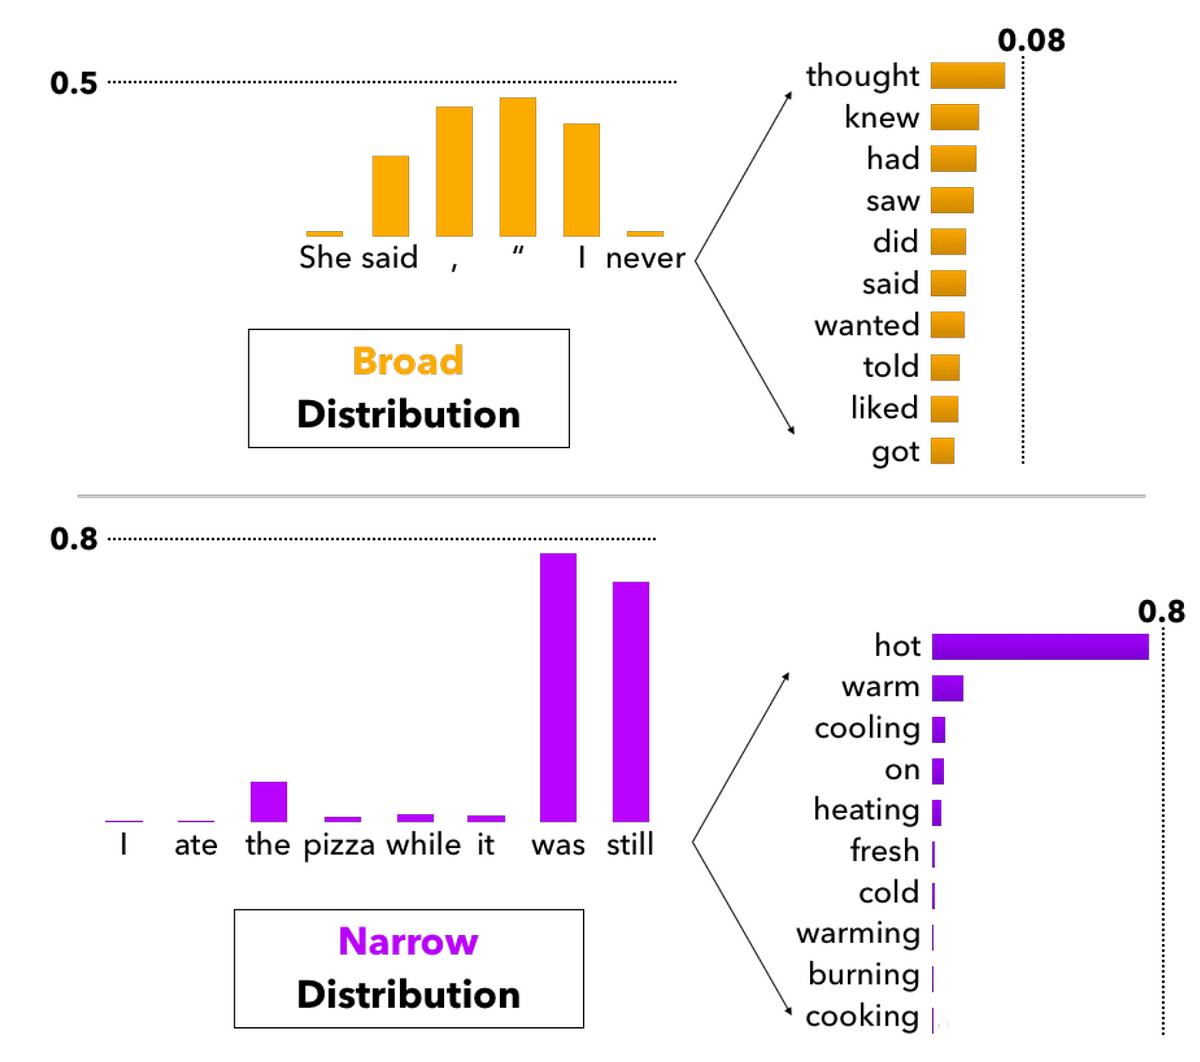 How to sample from language models | by Ben Mann | Towards Data Science